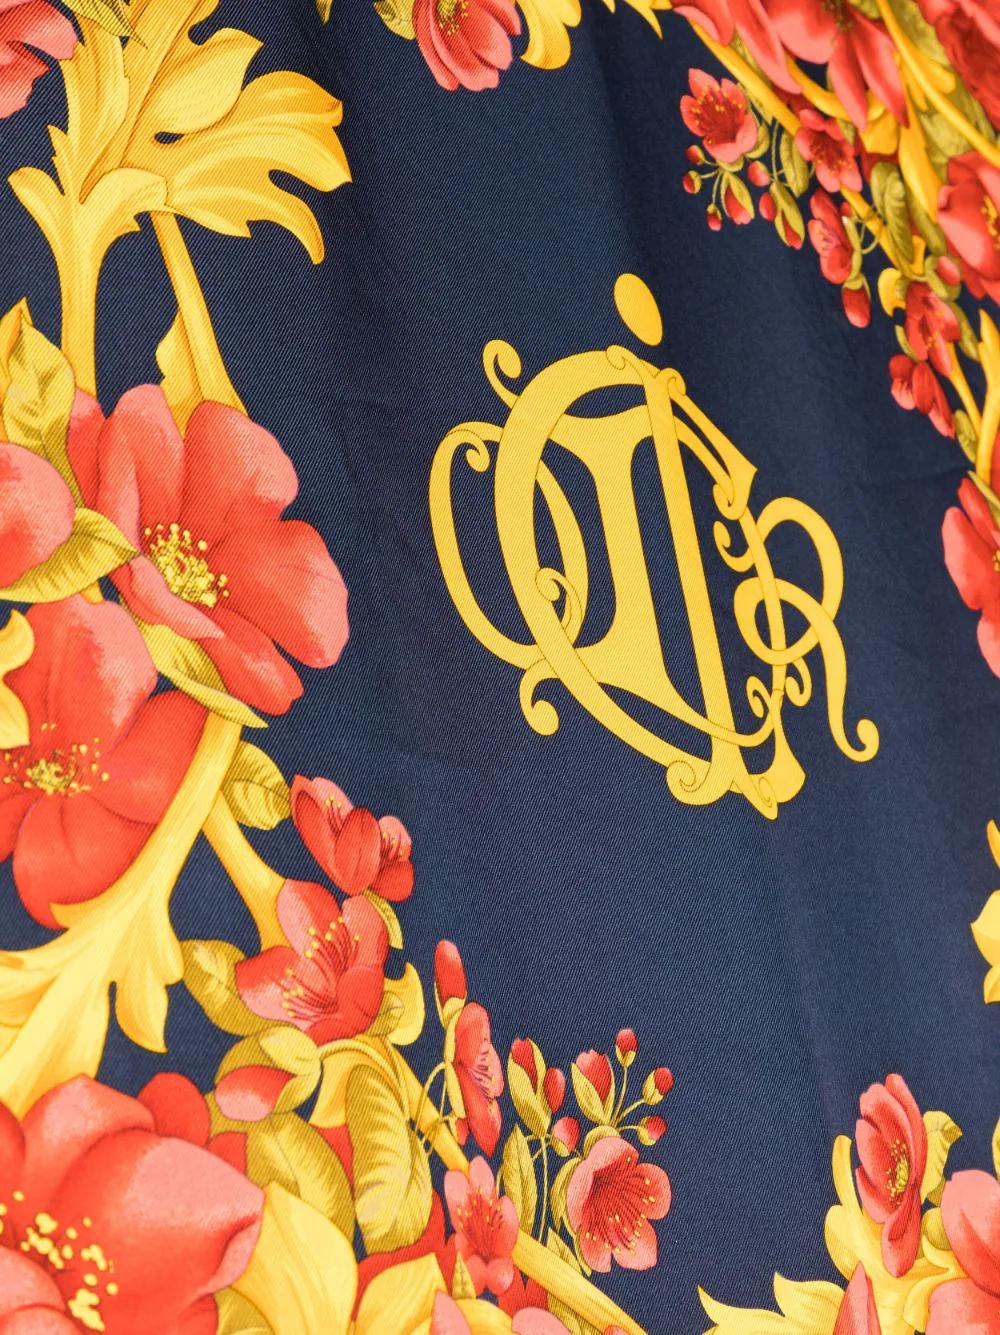 Elevate your look and accessorize with this Christian Dior floral baroque silk scarf. Crafted from luxurious 100% silk, this scarf is a timeless accessory with a finished edge and classic square body. Bring sophistication and refinement to any